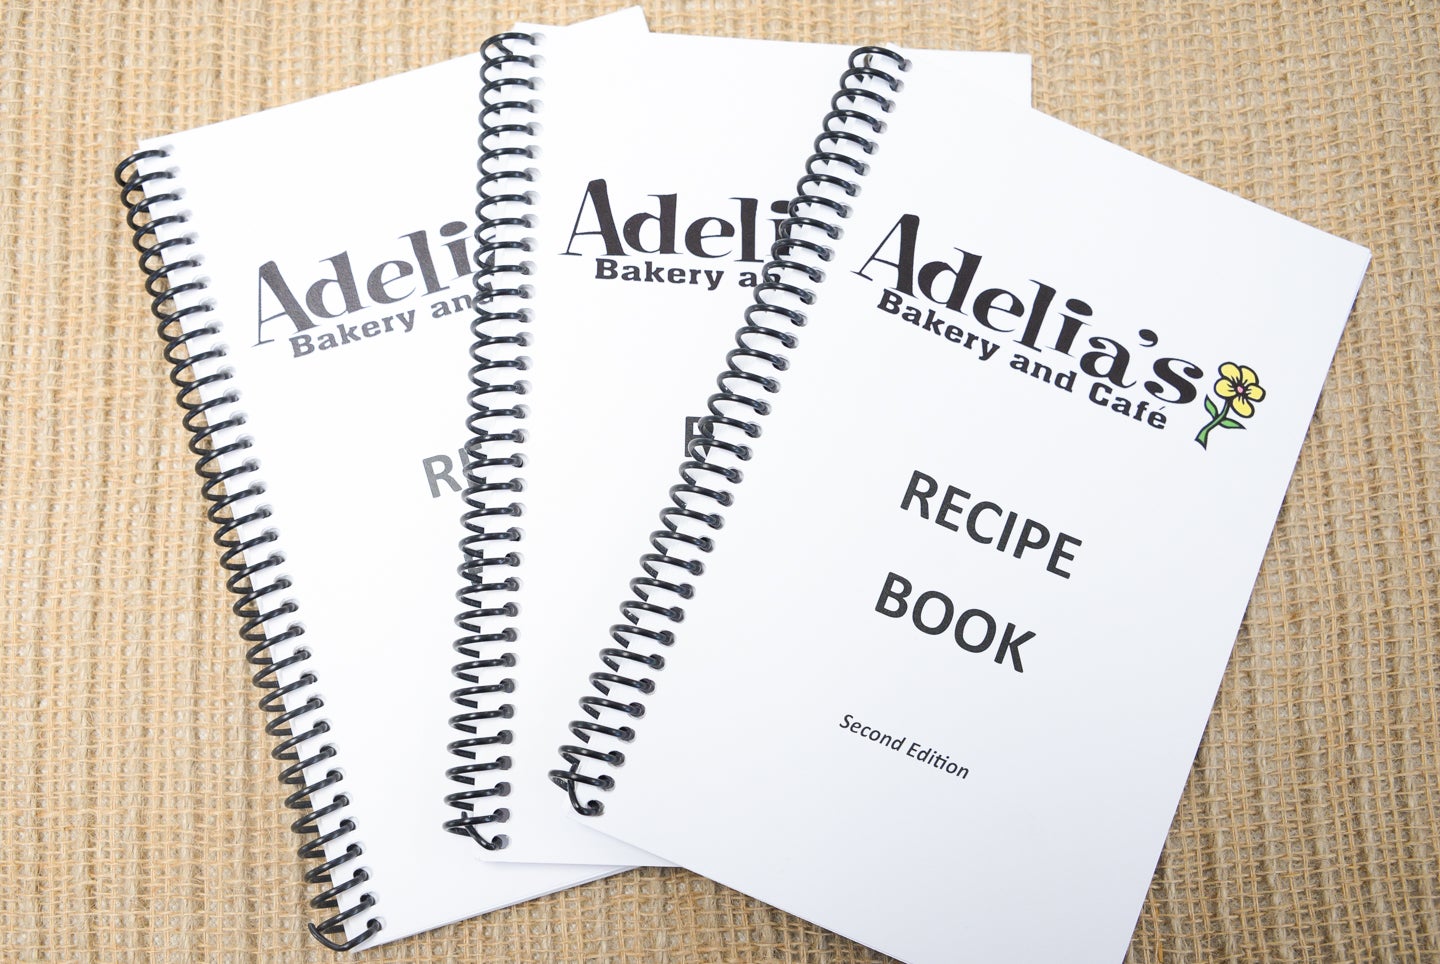 ‘Good food for a good cause’: Former Adelia’s Bakery and Café owners release second edition of recipe book to raise money for St. Vincent de Paul Society